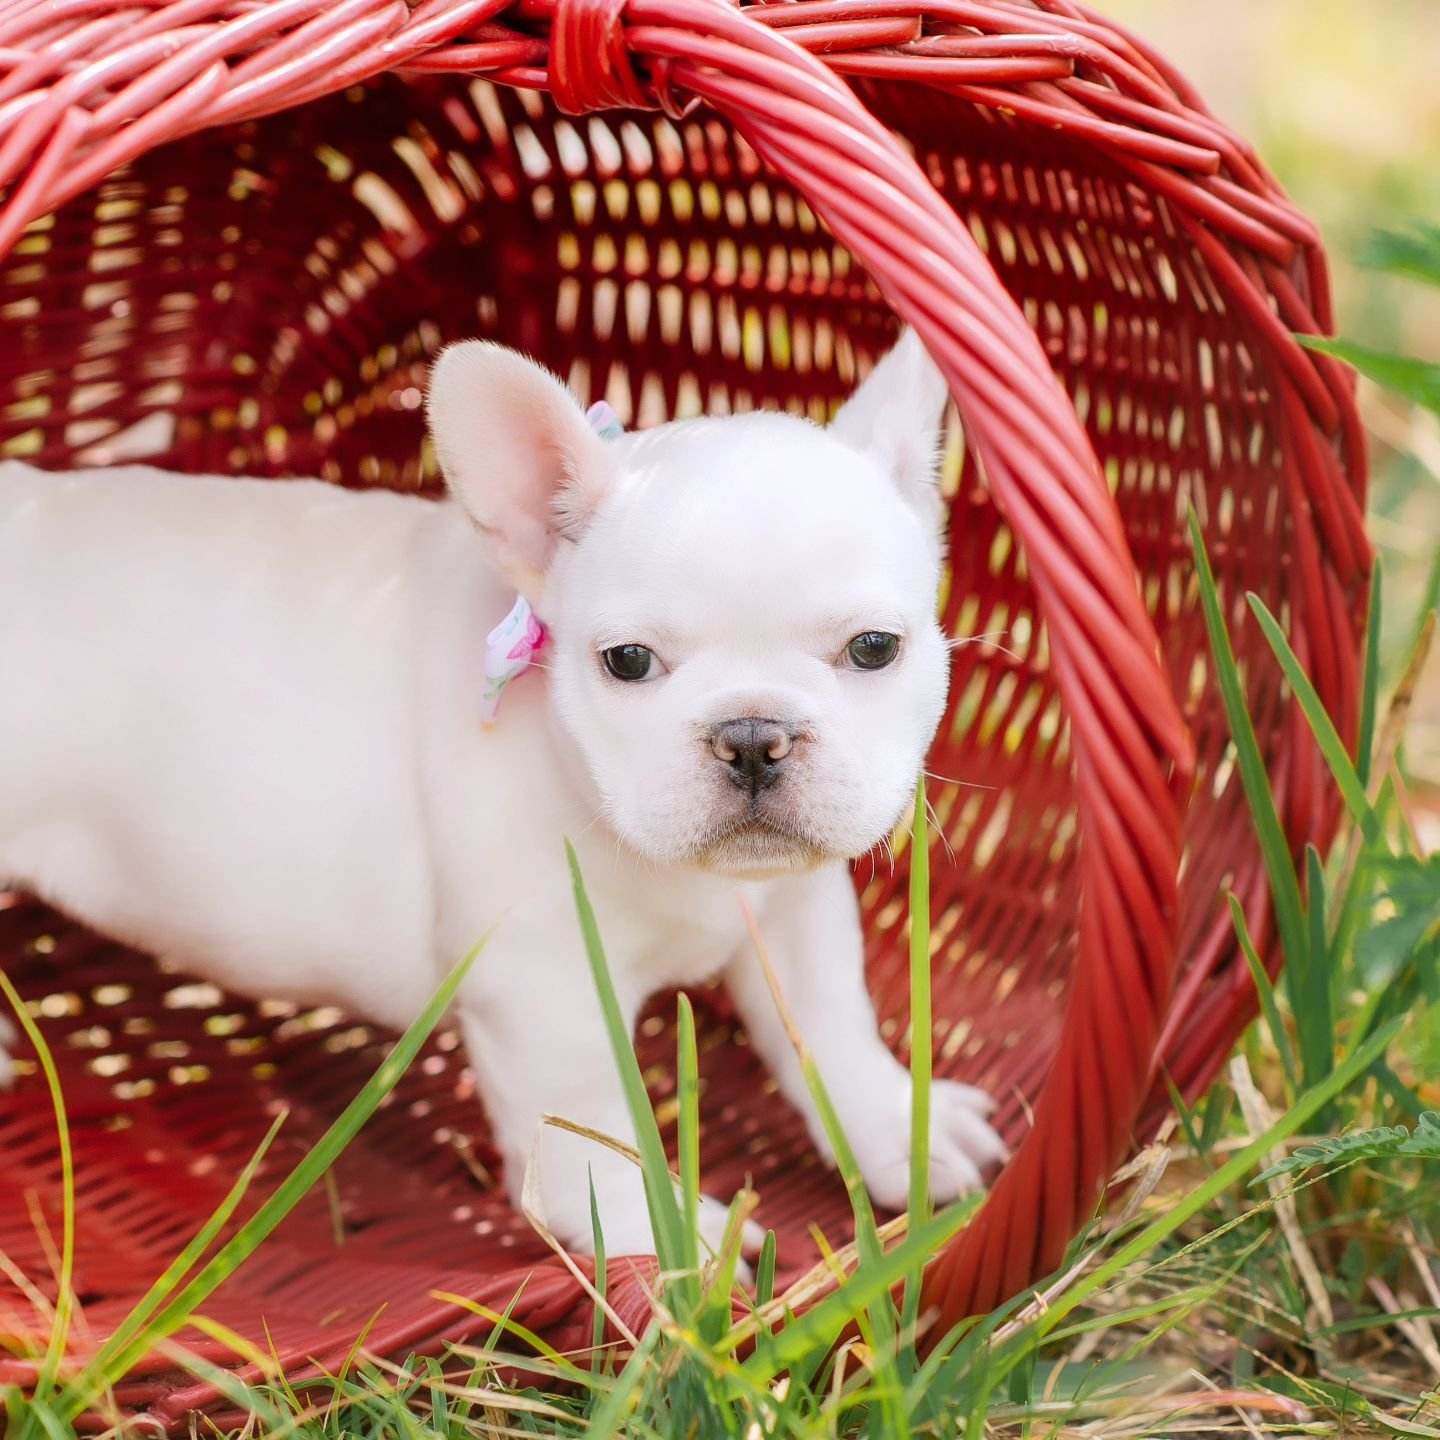 Puppy picnic in May 🌱🥕 🌞 &quot;Snacks, sunshine, and snuggles with a frenchie is the perfect recipe for a May afternoon.&quot; 🐾
.
.
.
#frenchbulldogpuppies #toppawfrenchies #dogs 
#frenchielove #bulldogbabies #frenchielife #puppylove #frenchieso